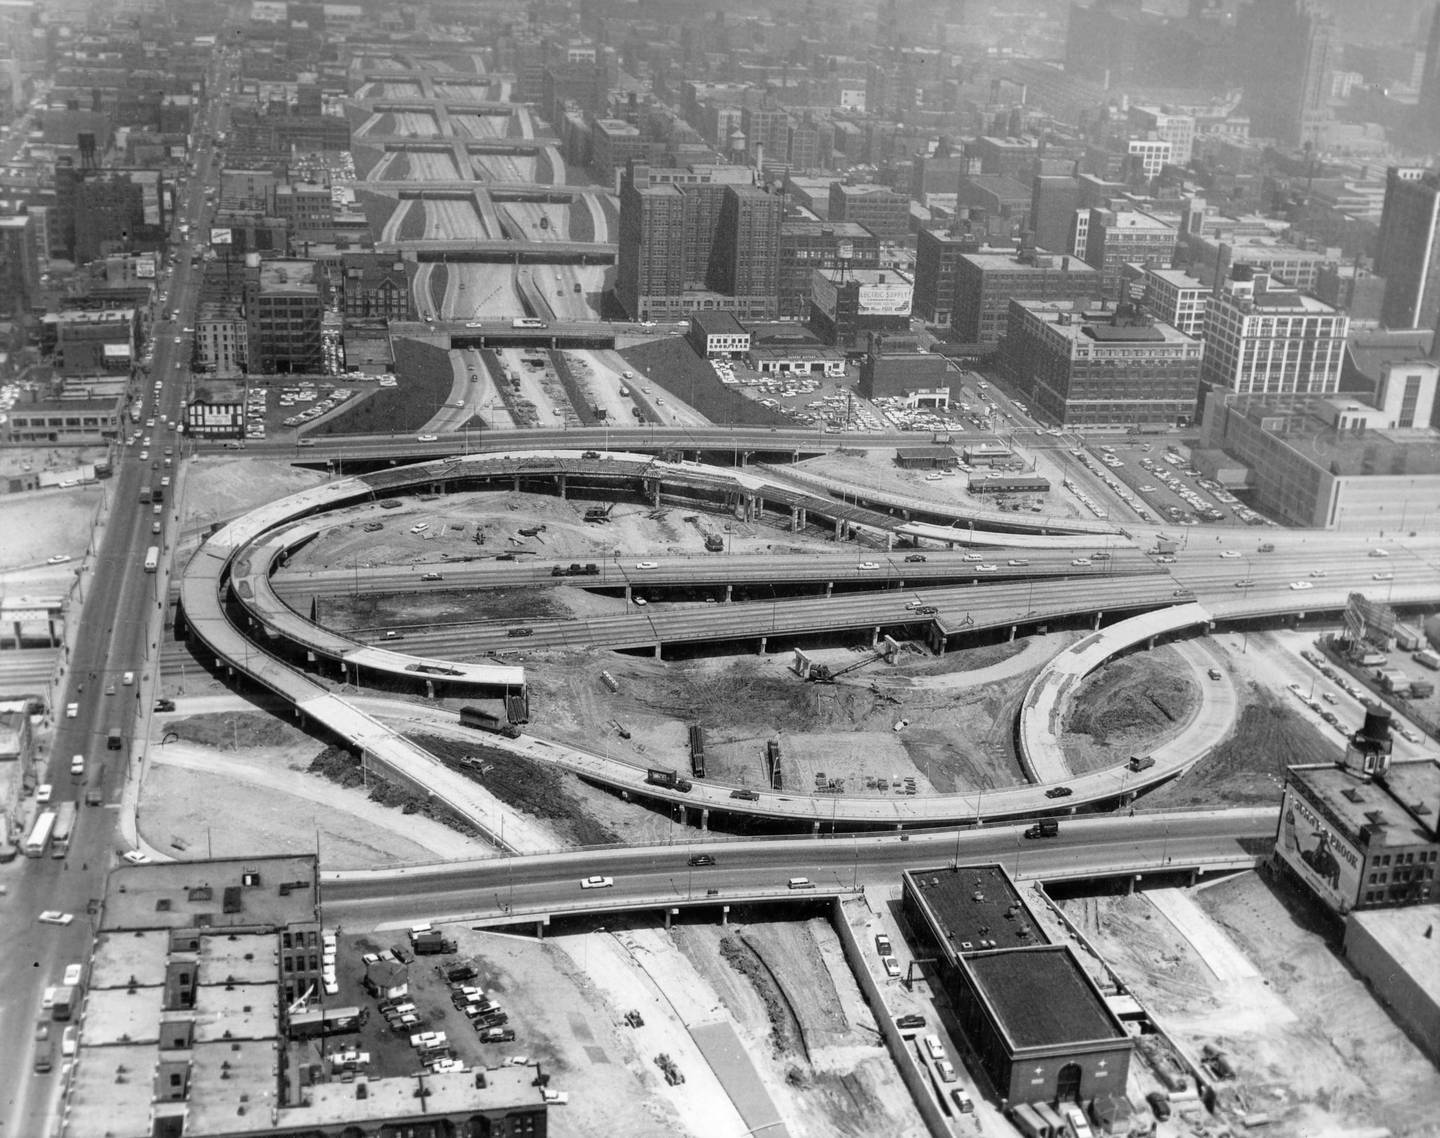 The Circle Interchange, shown in 1961, is where the Eisenhower, Dan Ryan and Kennedy expressways meet. It was built between 1958 and 1962 and renamed the Jane Byrne Interchange in 2014.